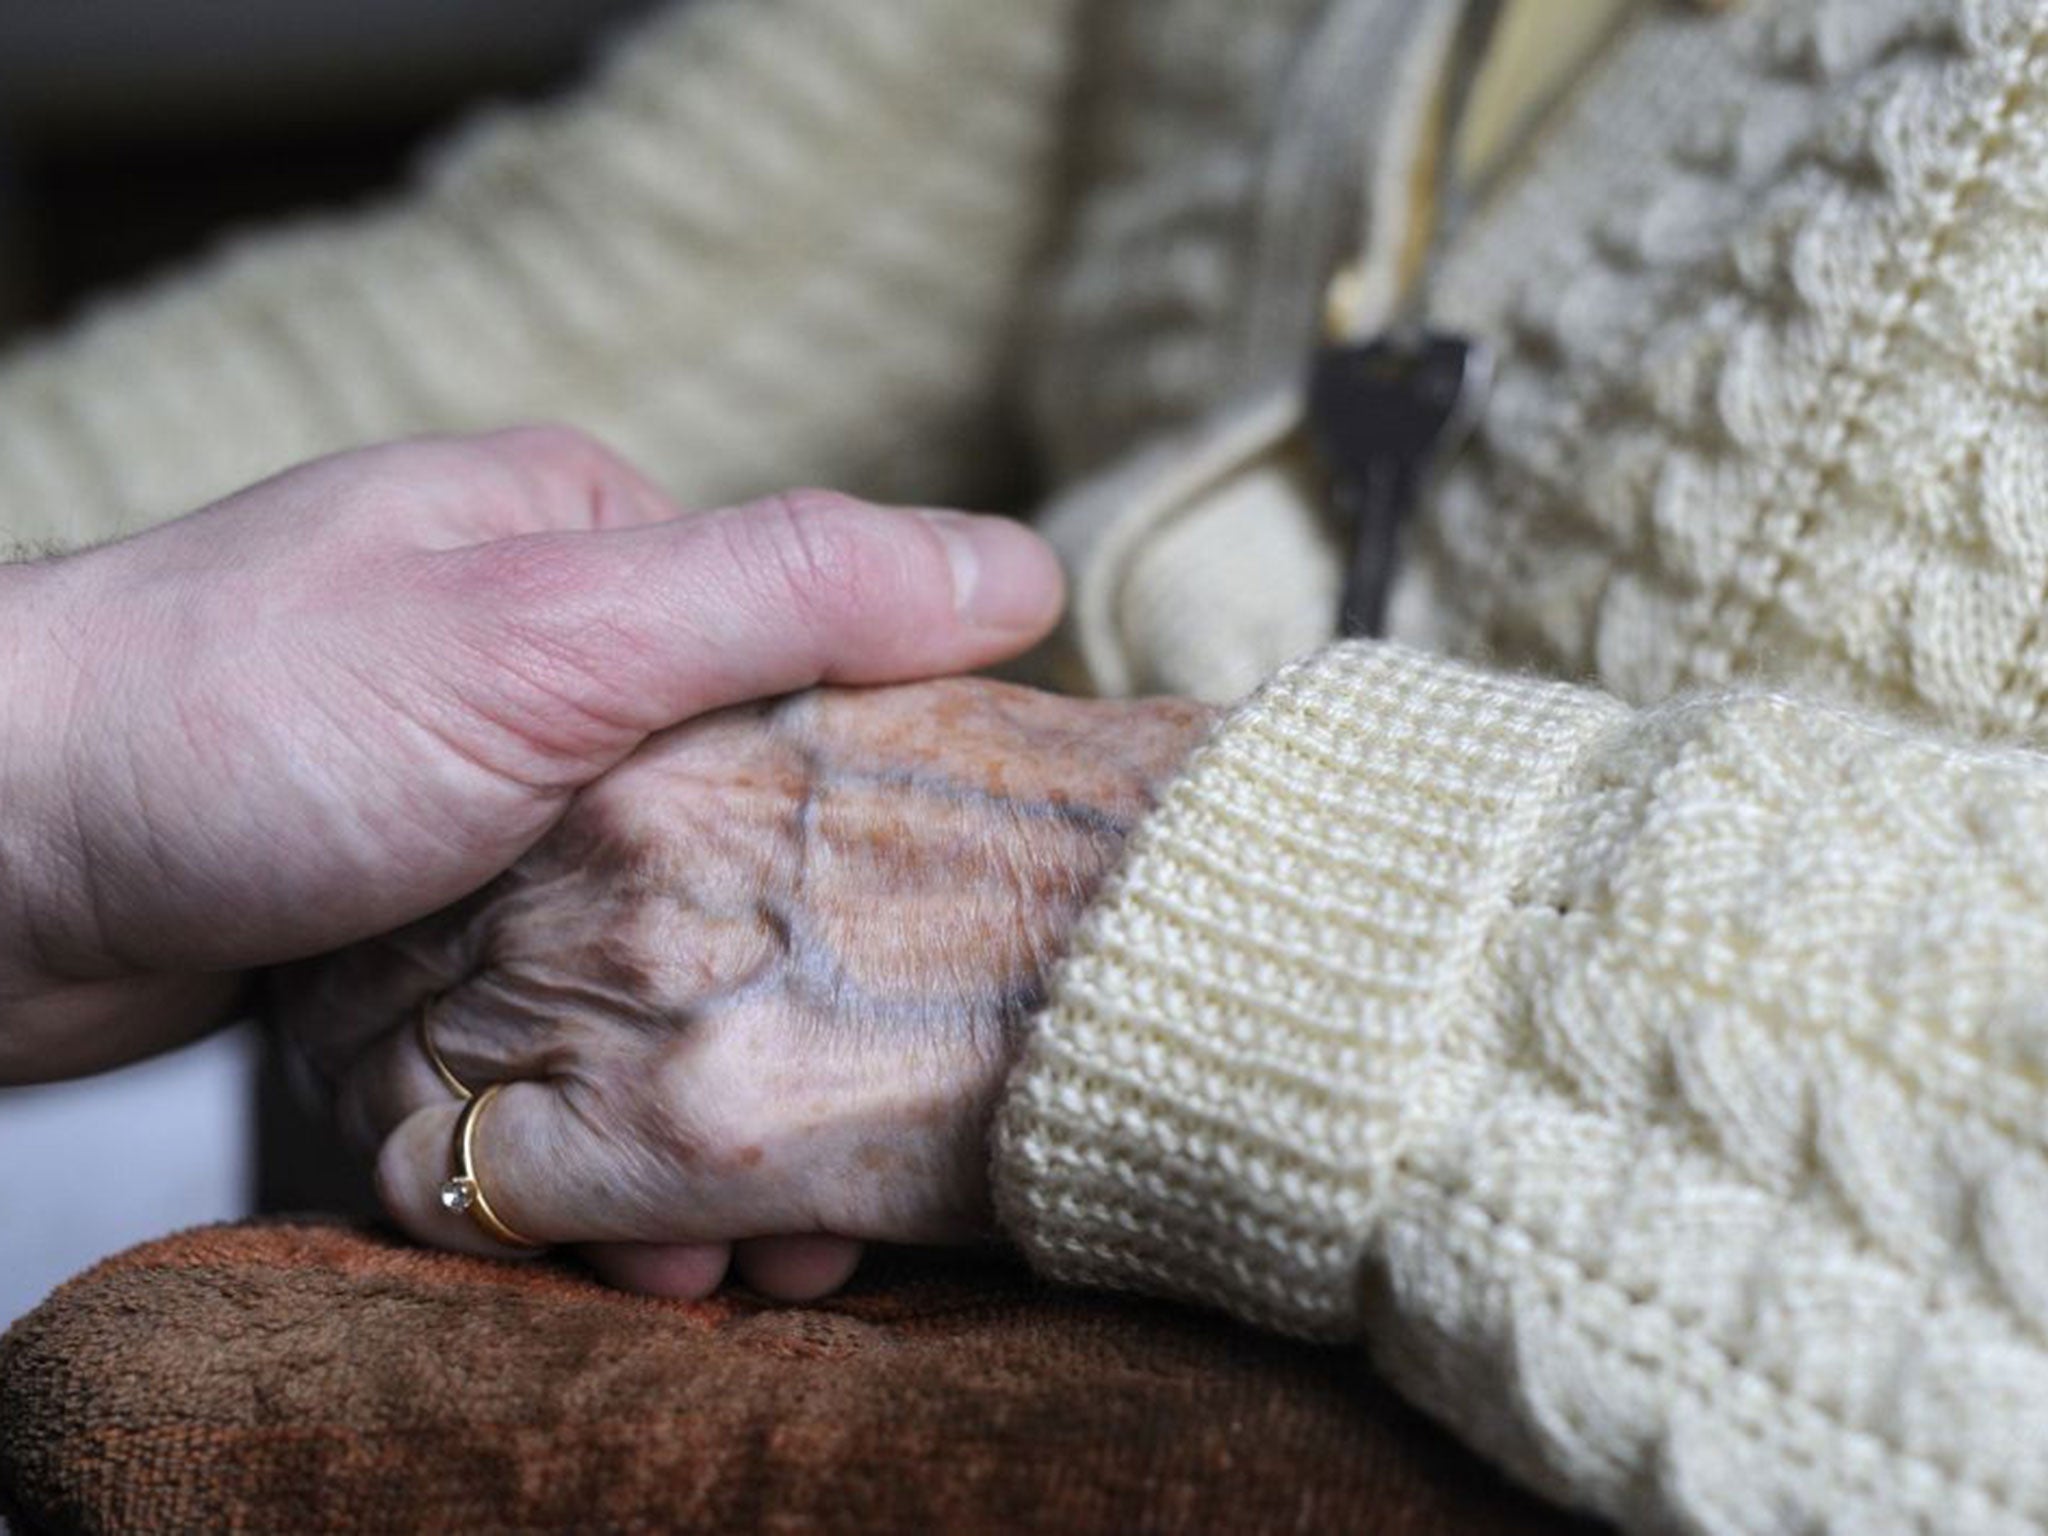 Alzheimer's Society is urging the Government to 'end the artificial divide between health and social care'